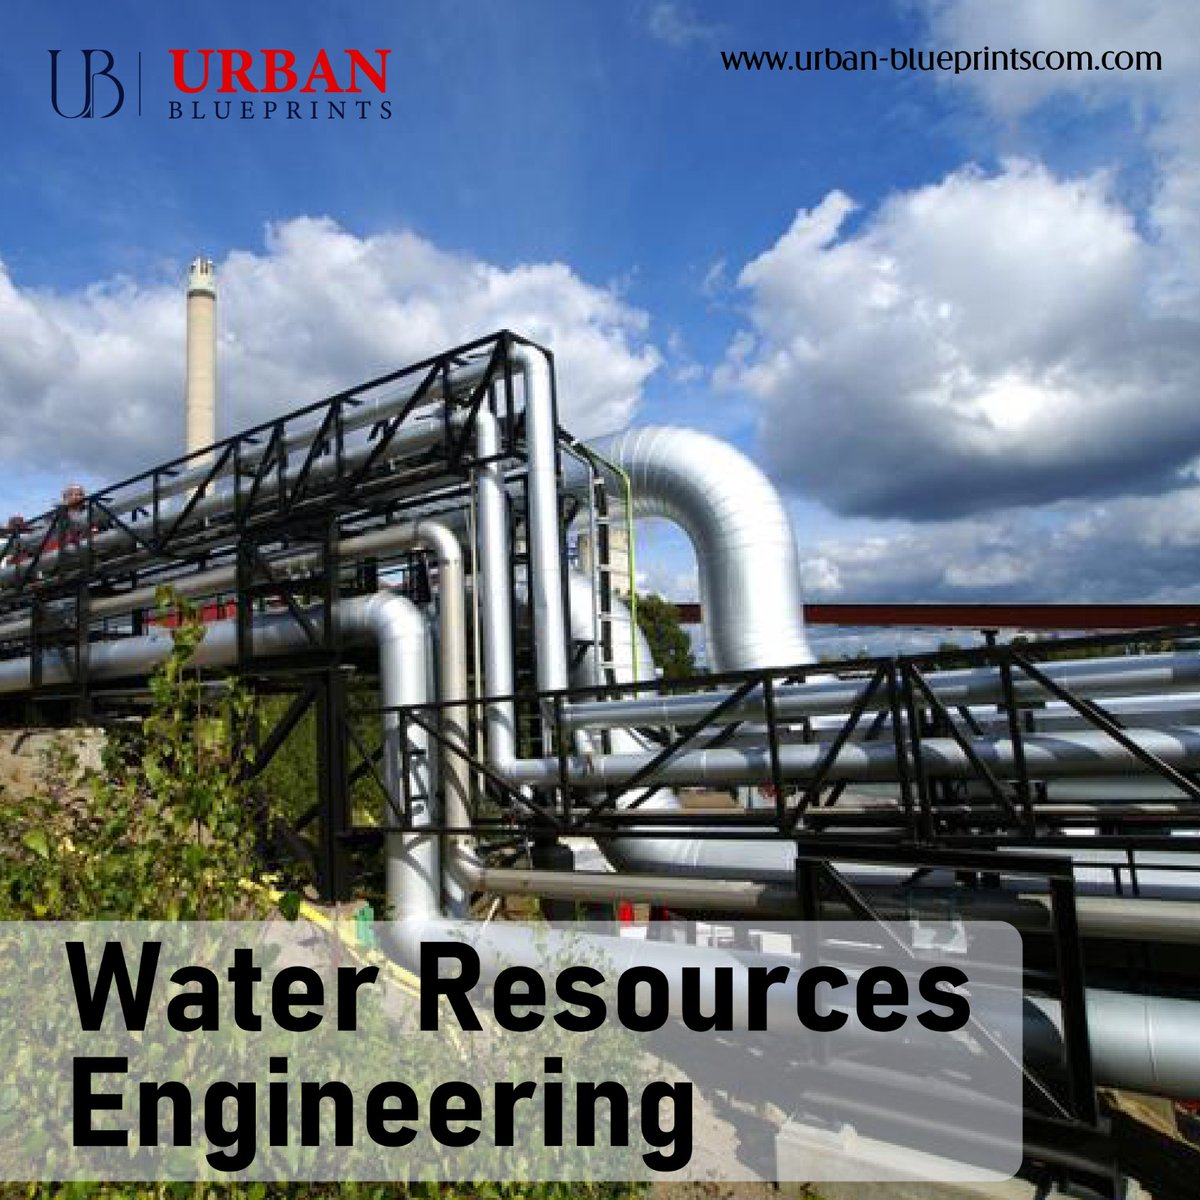 Connecting communities through water solutions! Our engineers design infrastructures that bridge gaps, bringing water security and prosperity to every corner of the globe.
.
.
#ubanblueprints #GlobalWaterSecurity #EngineerForChange #waterresourceenginnering 🌐🌍